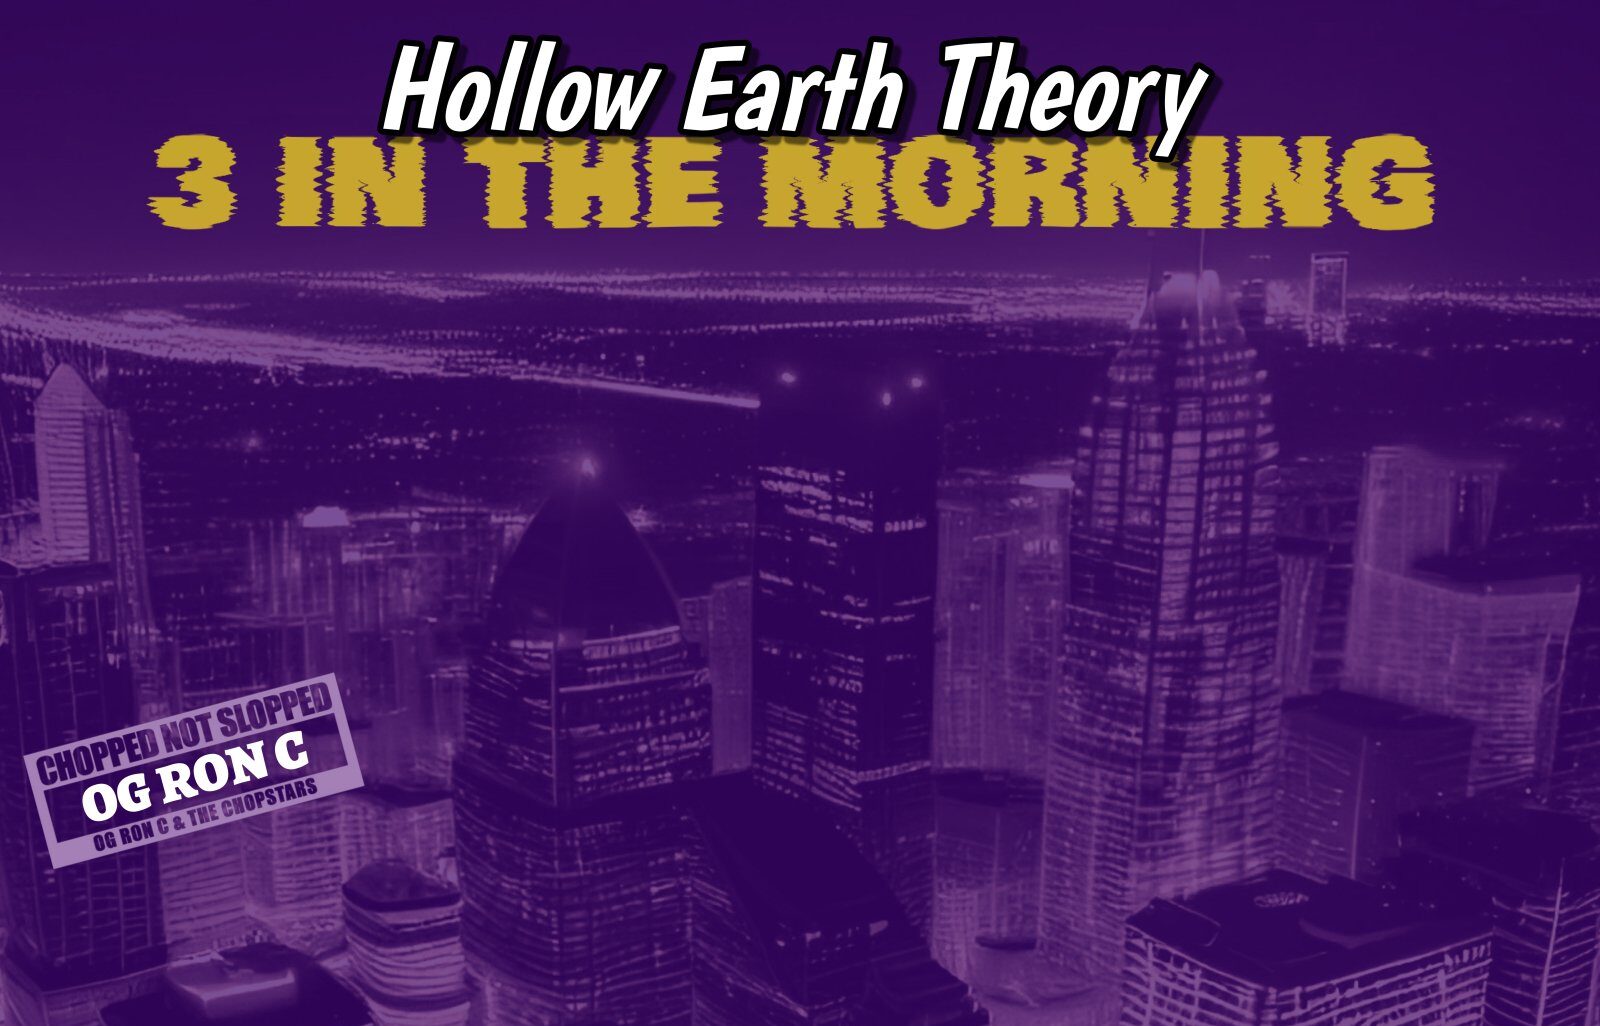 Hollow Earth Theory - "3 in the Morning"